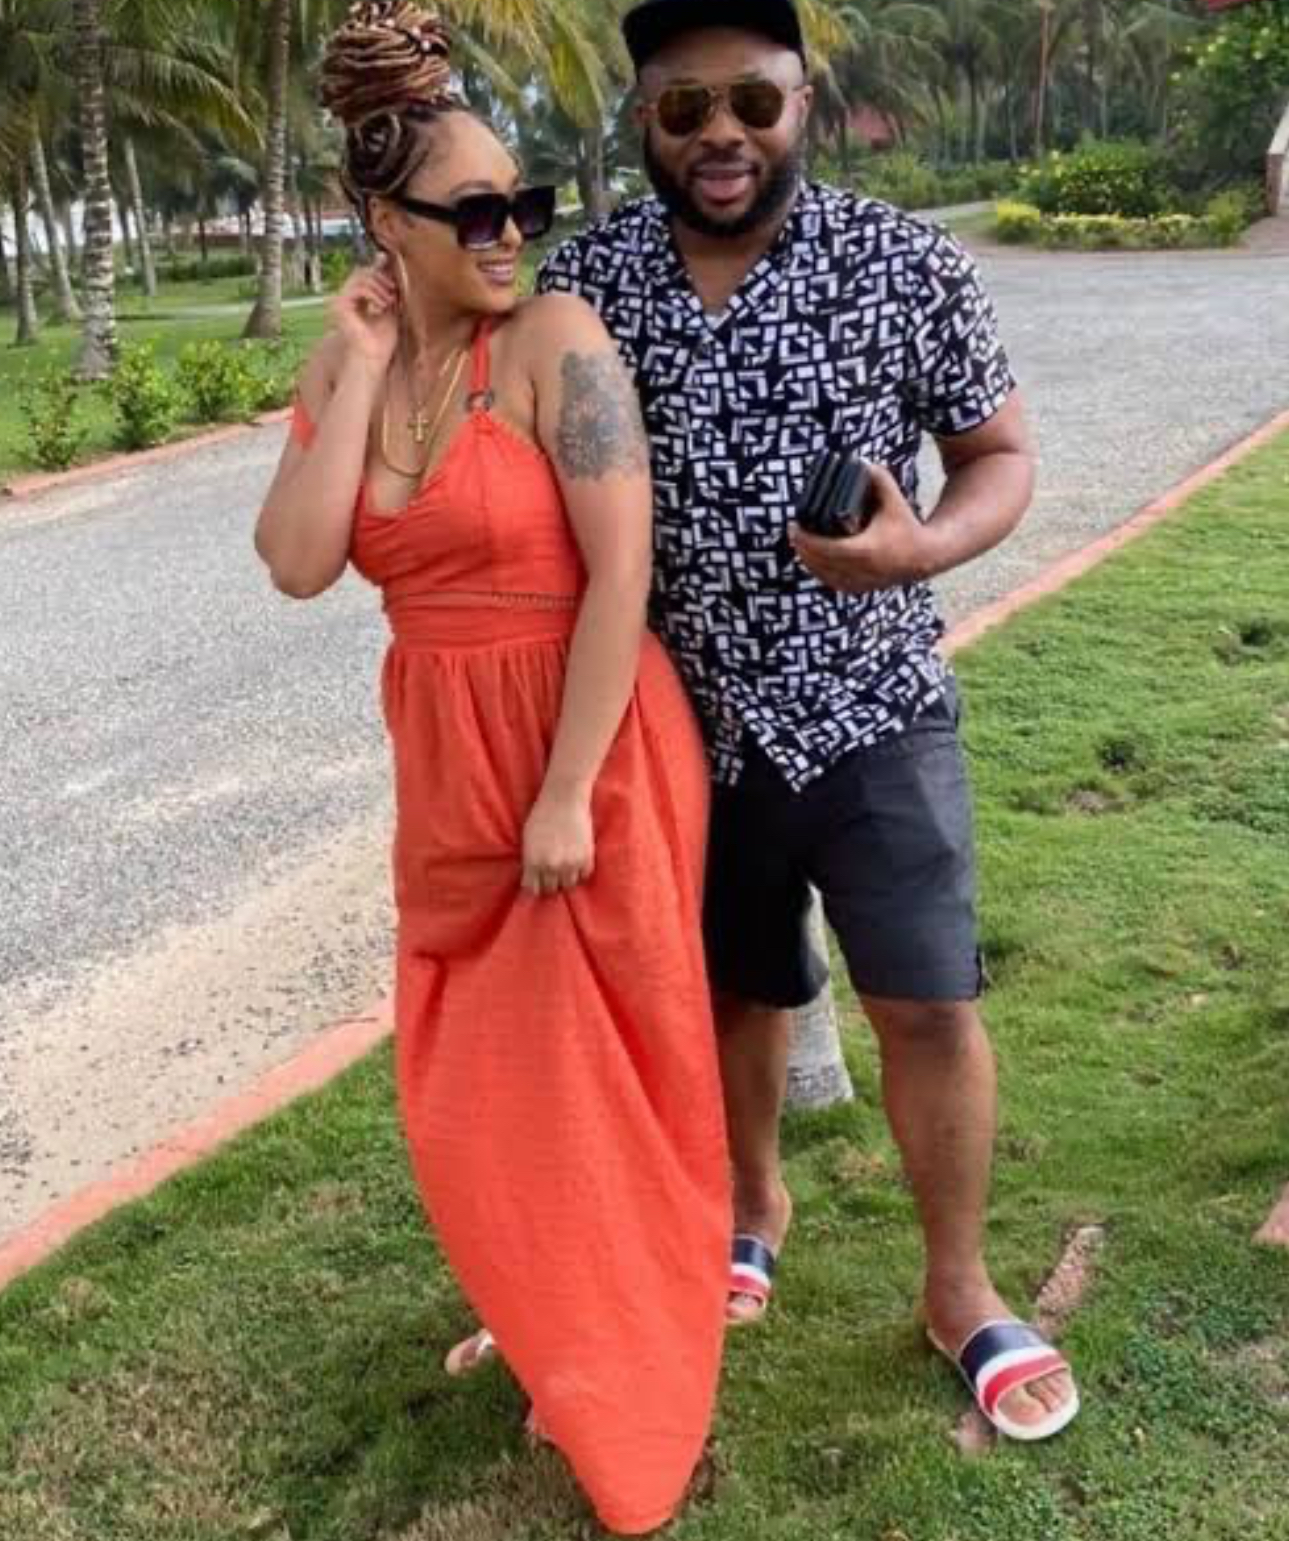 Churchill, Tonto Dikeh's Ex, Welcomes Son With His New Wife Rosy Meurer